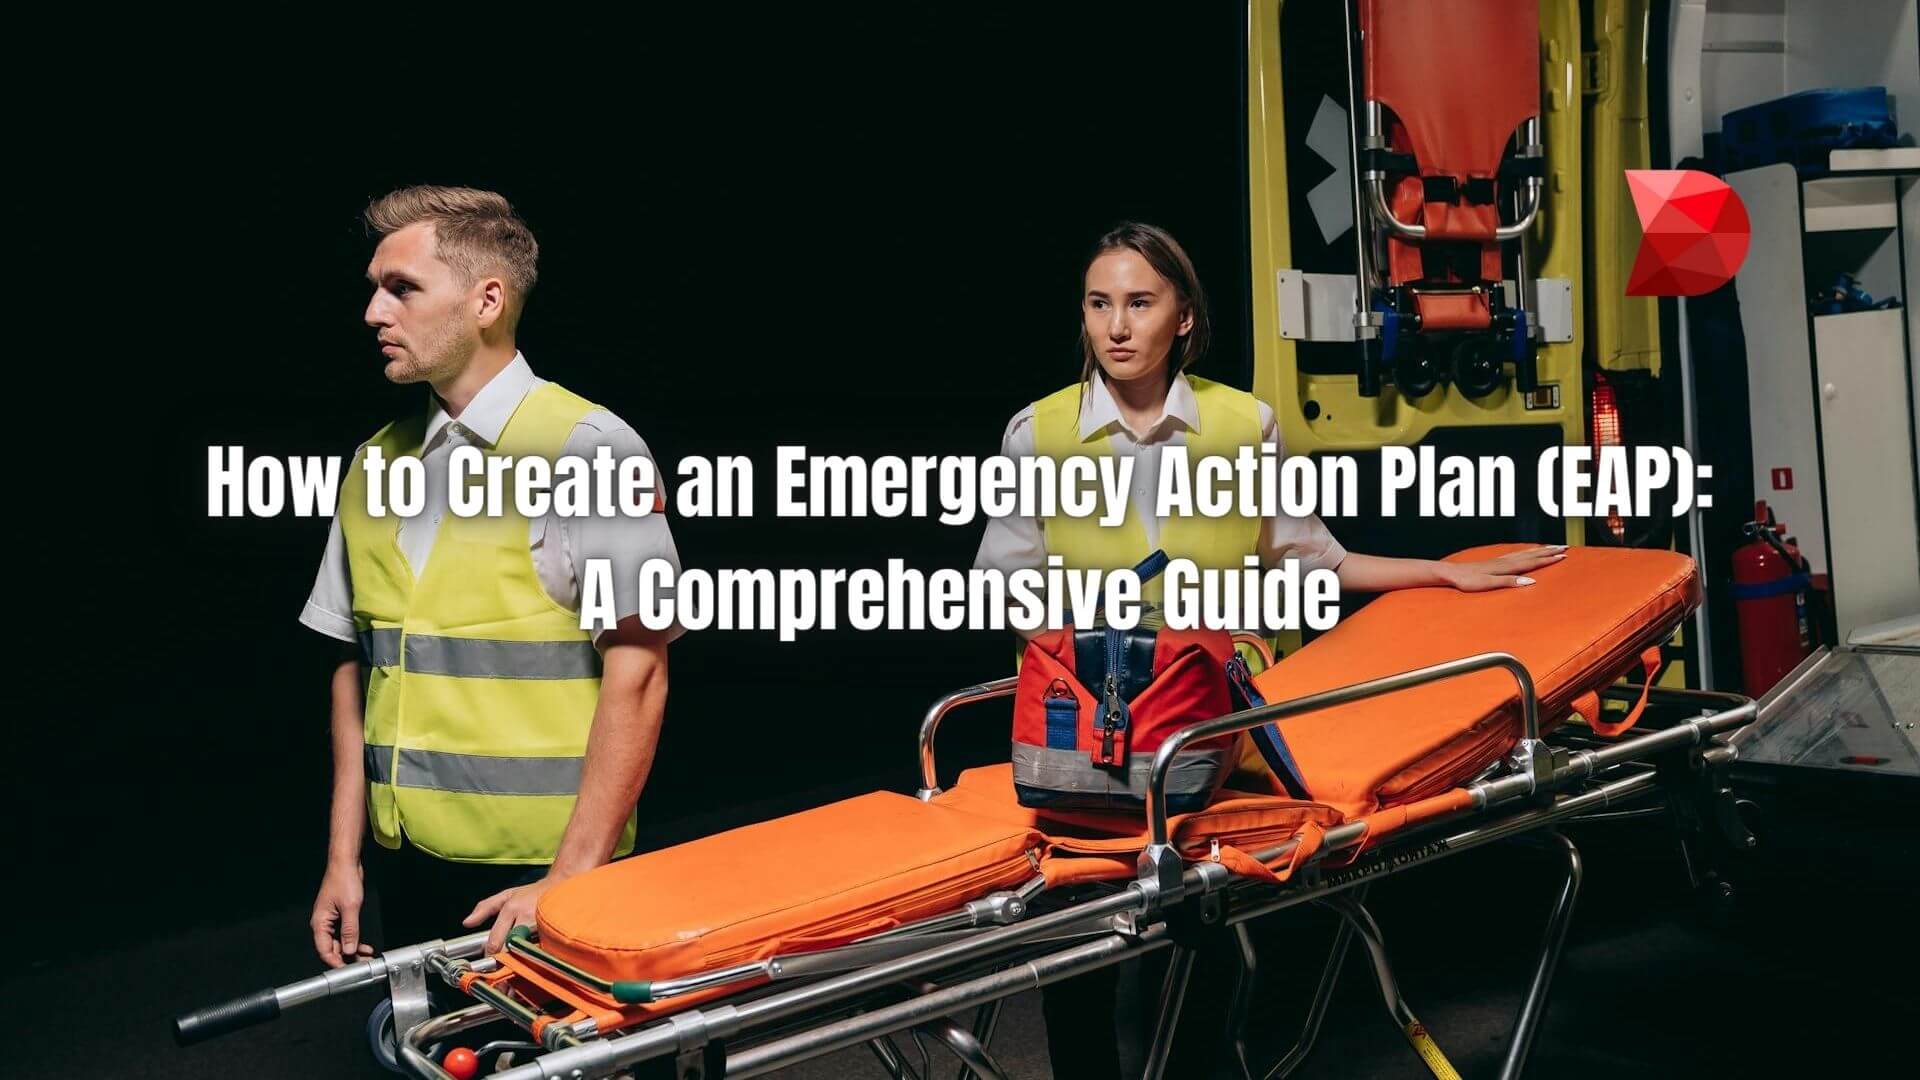 Master the art of emergency preparedness! Learn how to create an effective emergency action plan checklist to keep your business safe.